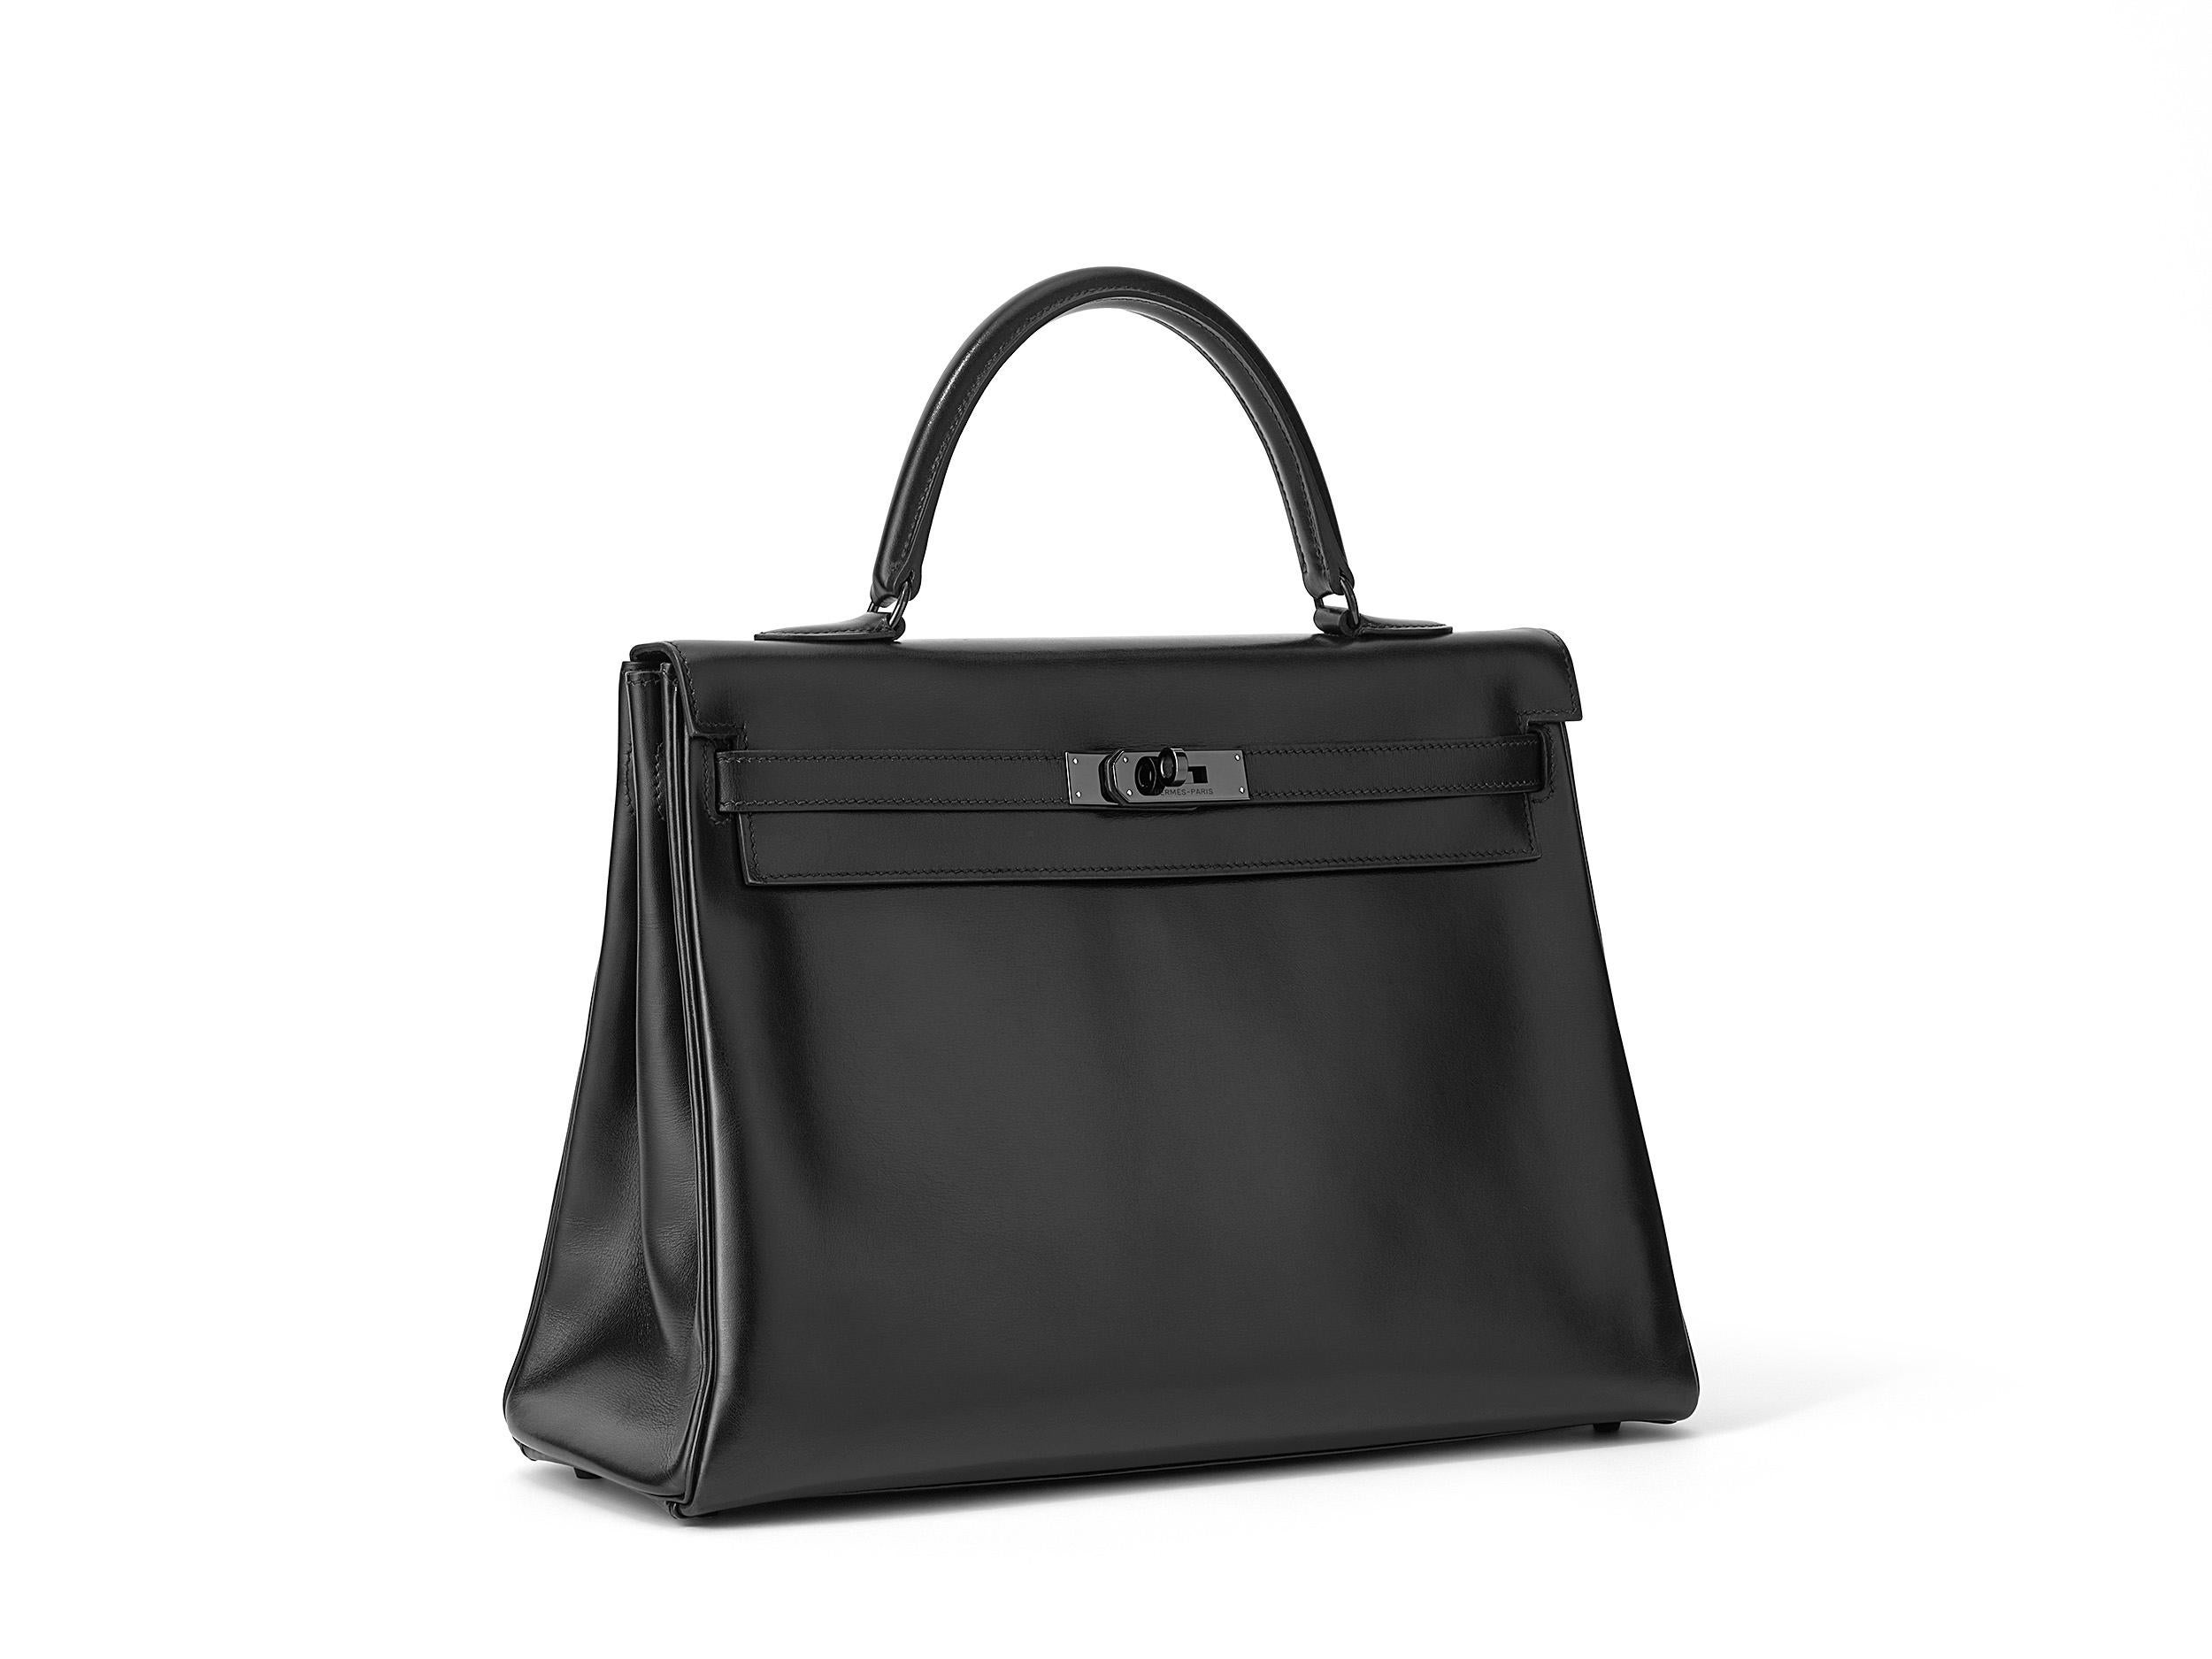 Hermès Kelly So Black 35 in noir and boxcalf leather with black hardware. The bag had already been in the Hermès Spa and is in a good condition with small marks on the front and back side of the bag. Visible marks on the bottom, on the feet and